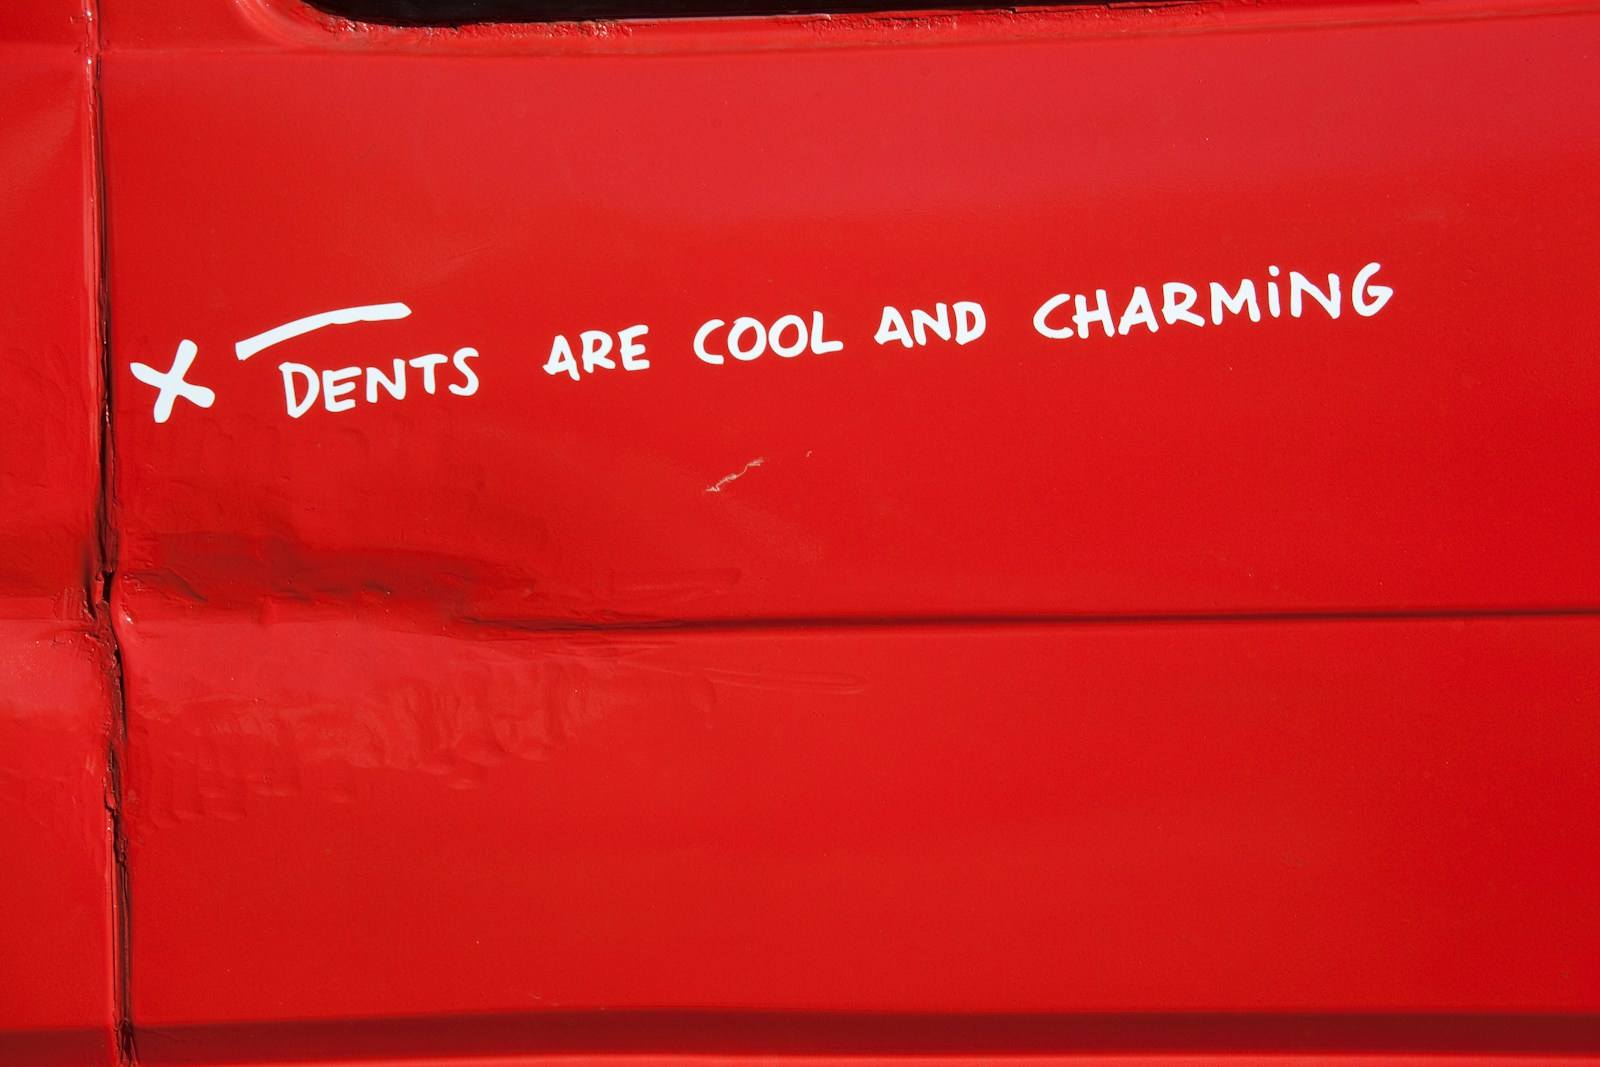 a sticker on the side of a red vehicle